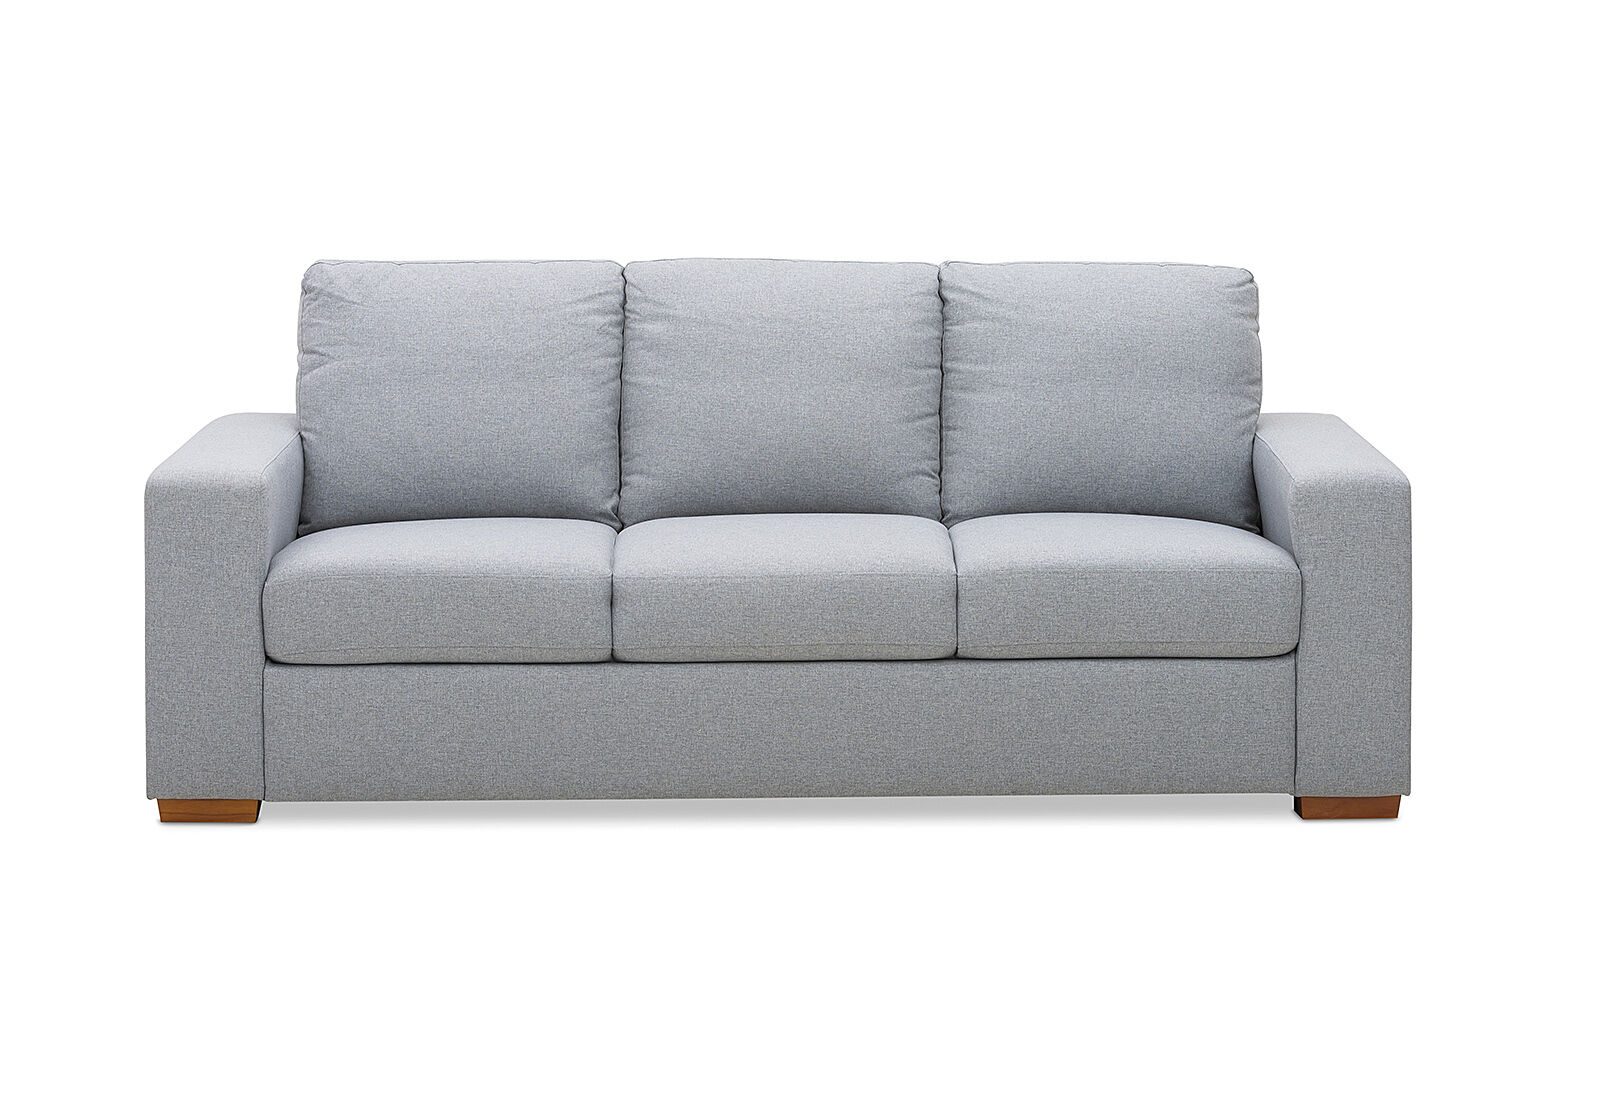 Light Grey Nixon Fabric 3 Seater Sofa, How Much Fabric Is Needed For A 3 Seater Sofa